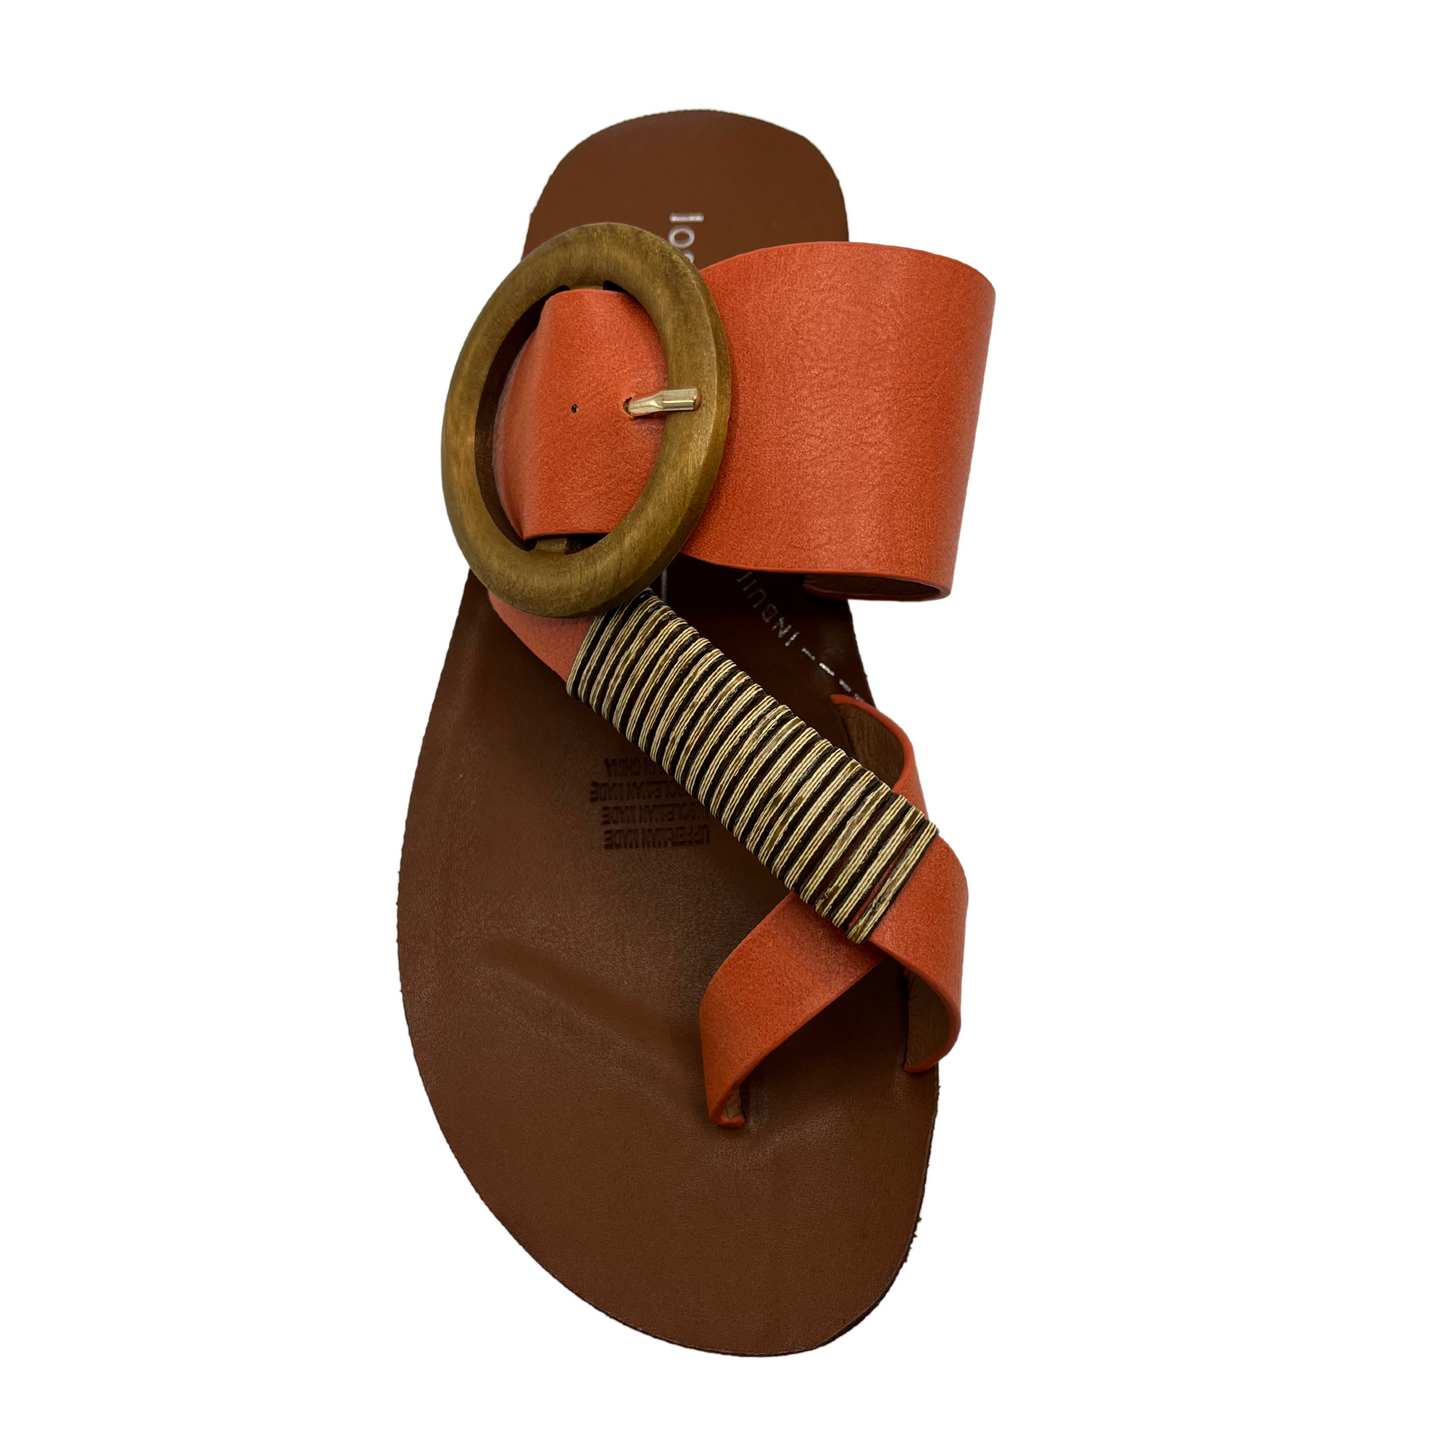 Top view of orange strapped slip on sandal. Featuring a wooden buckle and bamboo wrap on the toe strap.